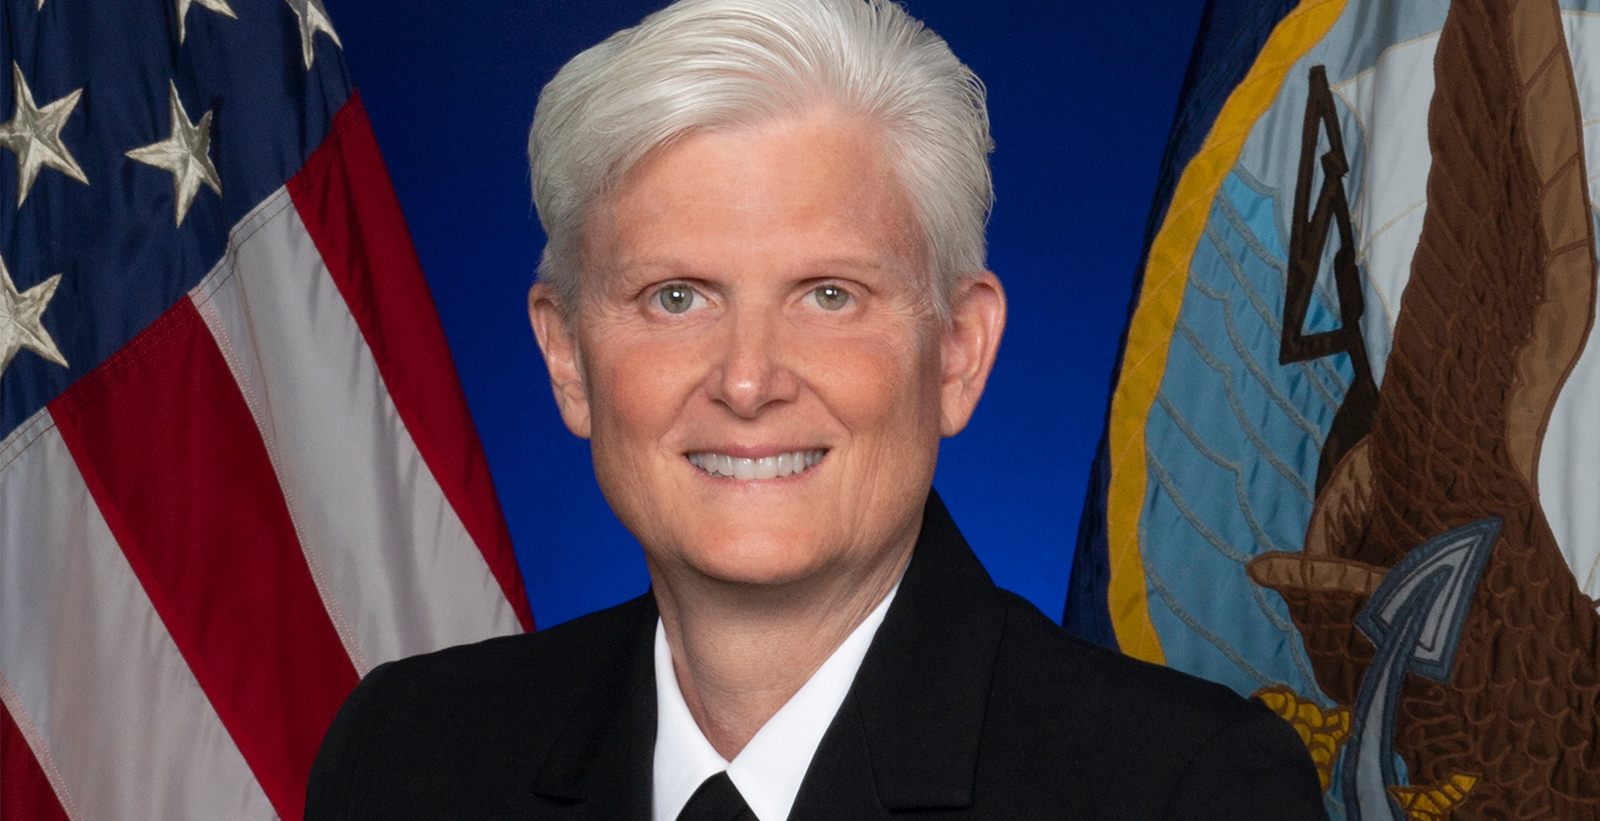 Navy Rear Admiral Gayle Shaffer, a 1987 biology graduate of the University of South Alabama, is the first dentist to serve as Deputy Surgeon General.